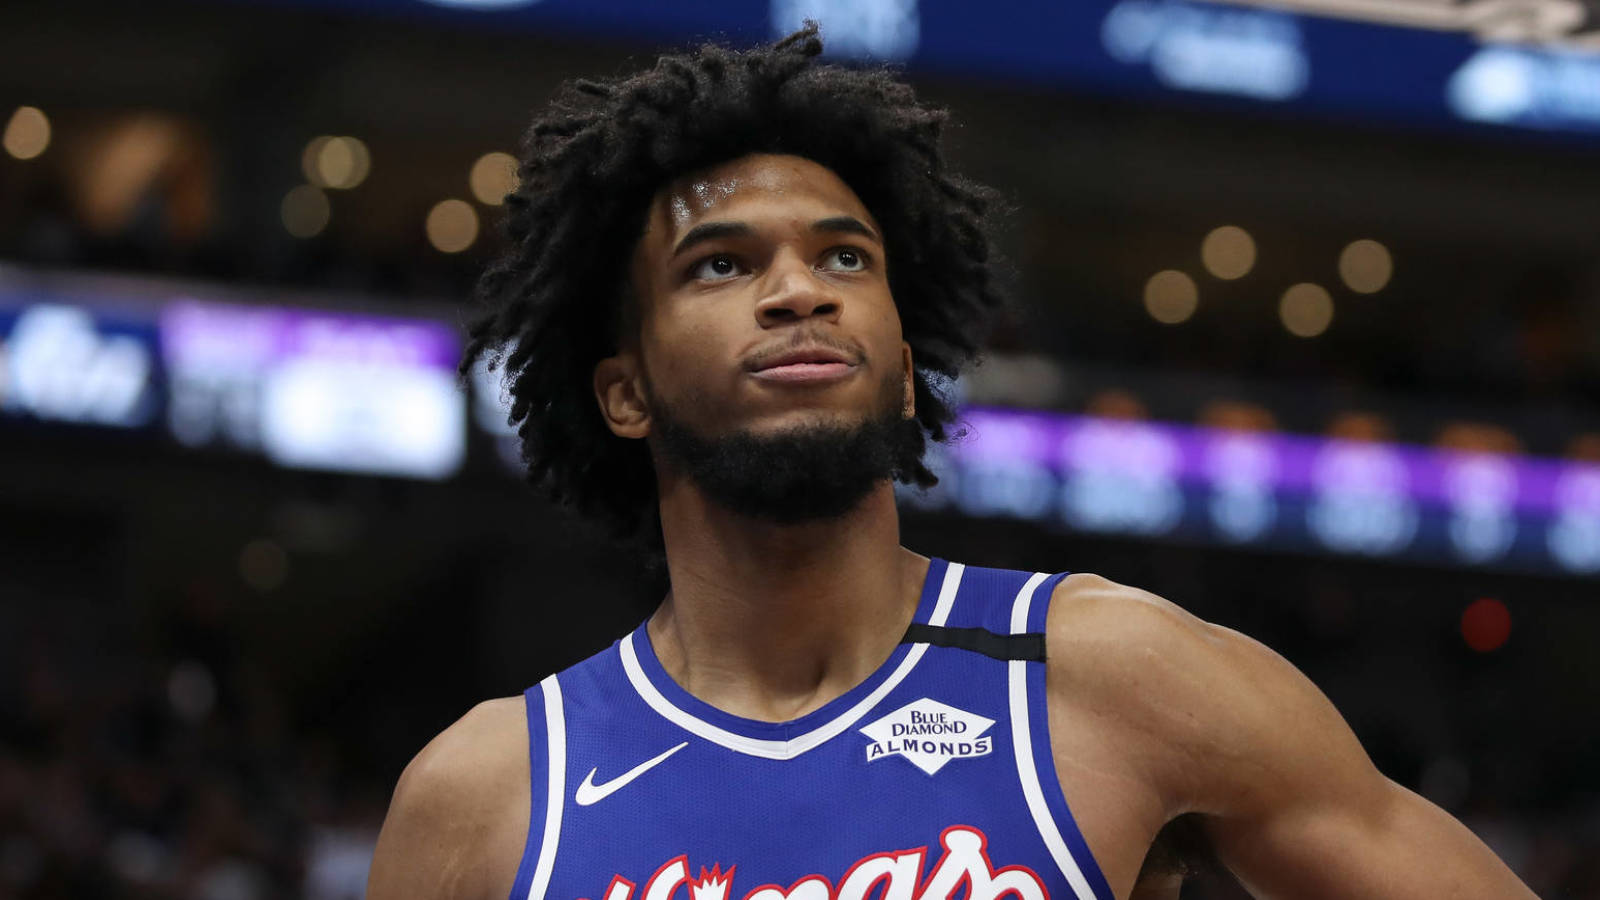 Marvin Bagley will not participate in NBA resumption due to foot injury | Yardbarker